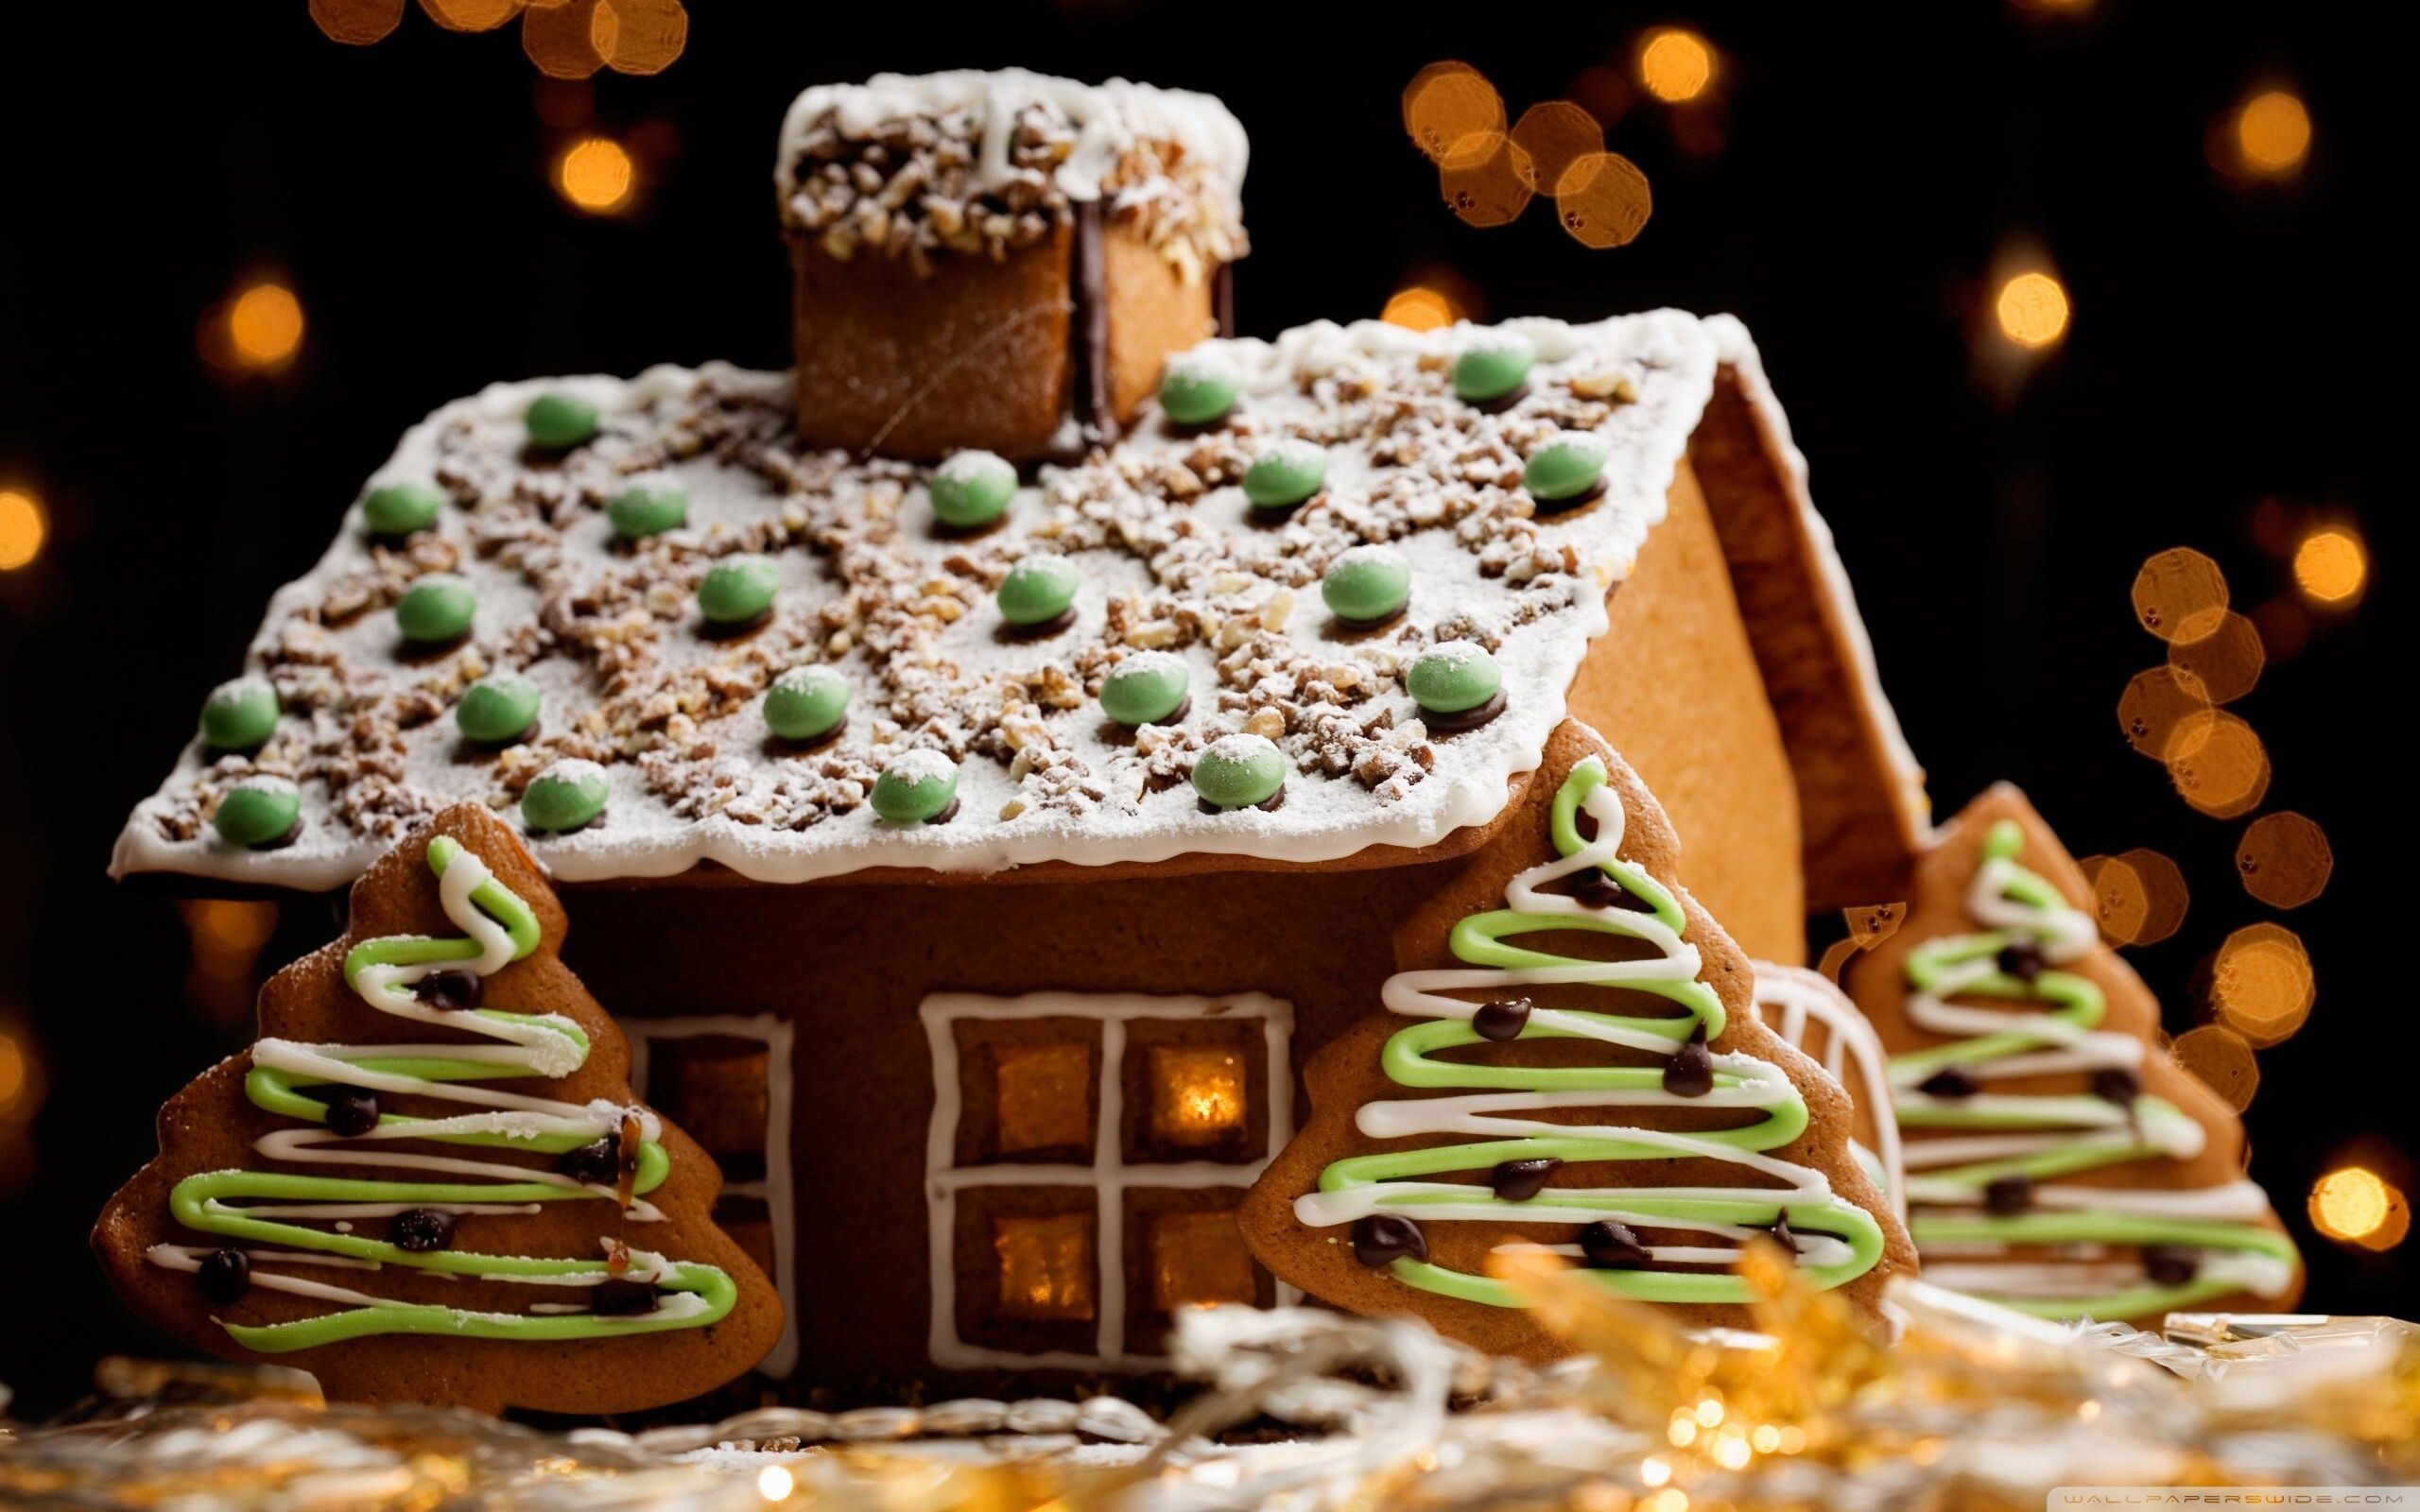 Gingerbread House: Edible components, Intricately piped icing decorations, Structures made of gingerbread. 2560x1600 HD Background.